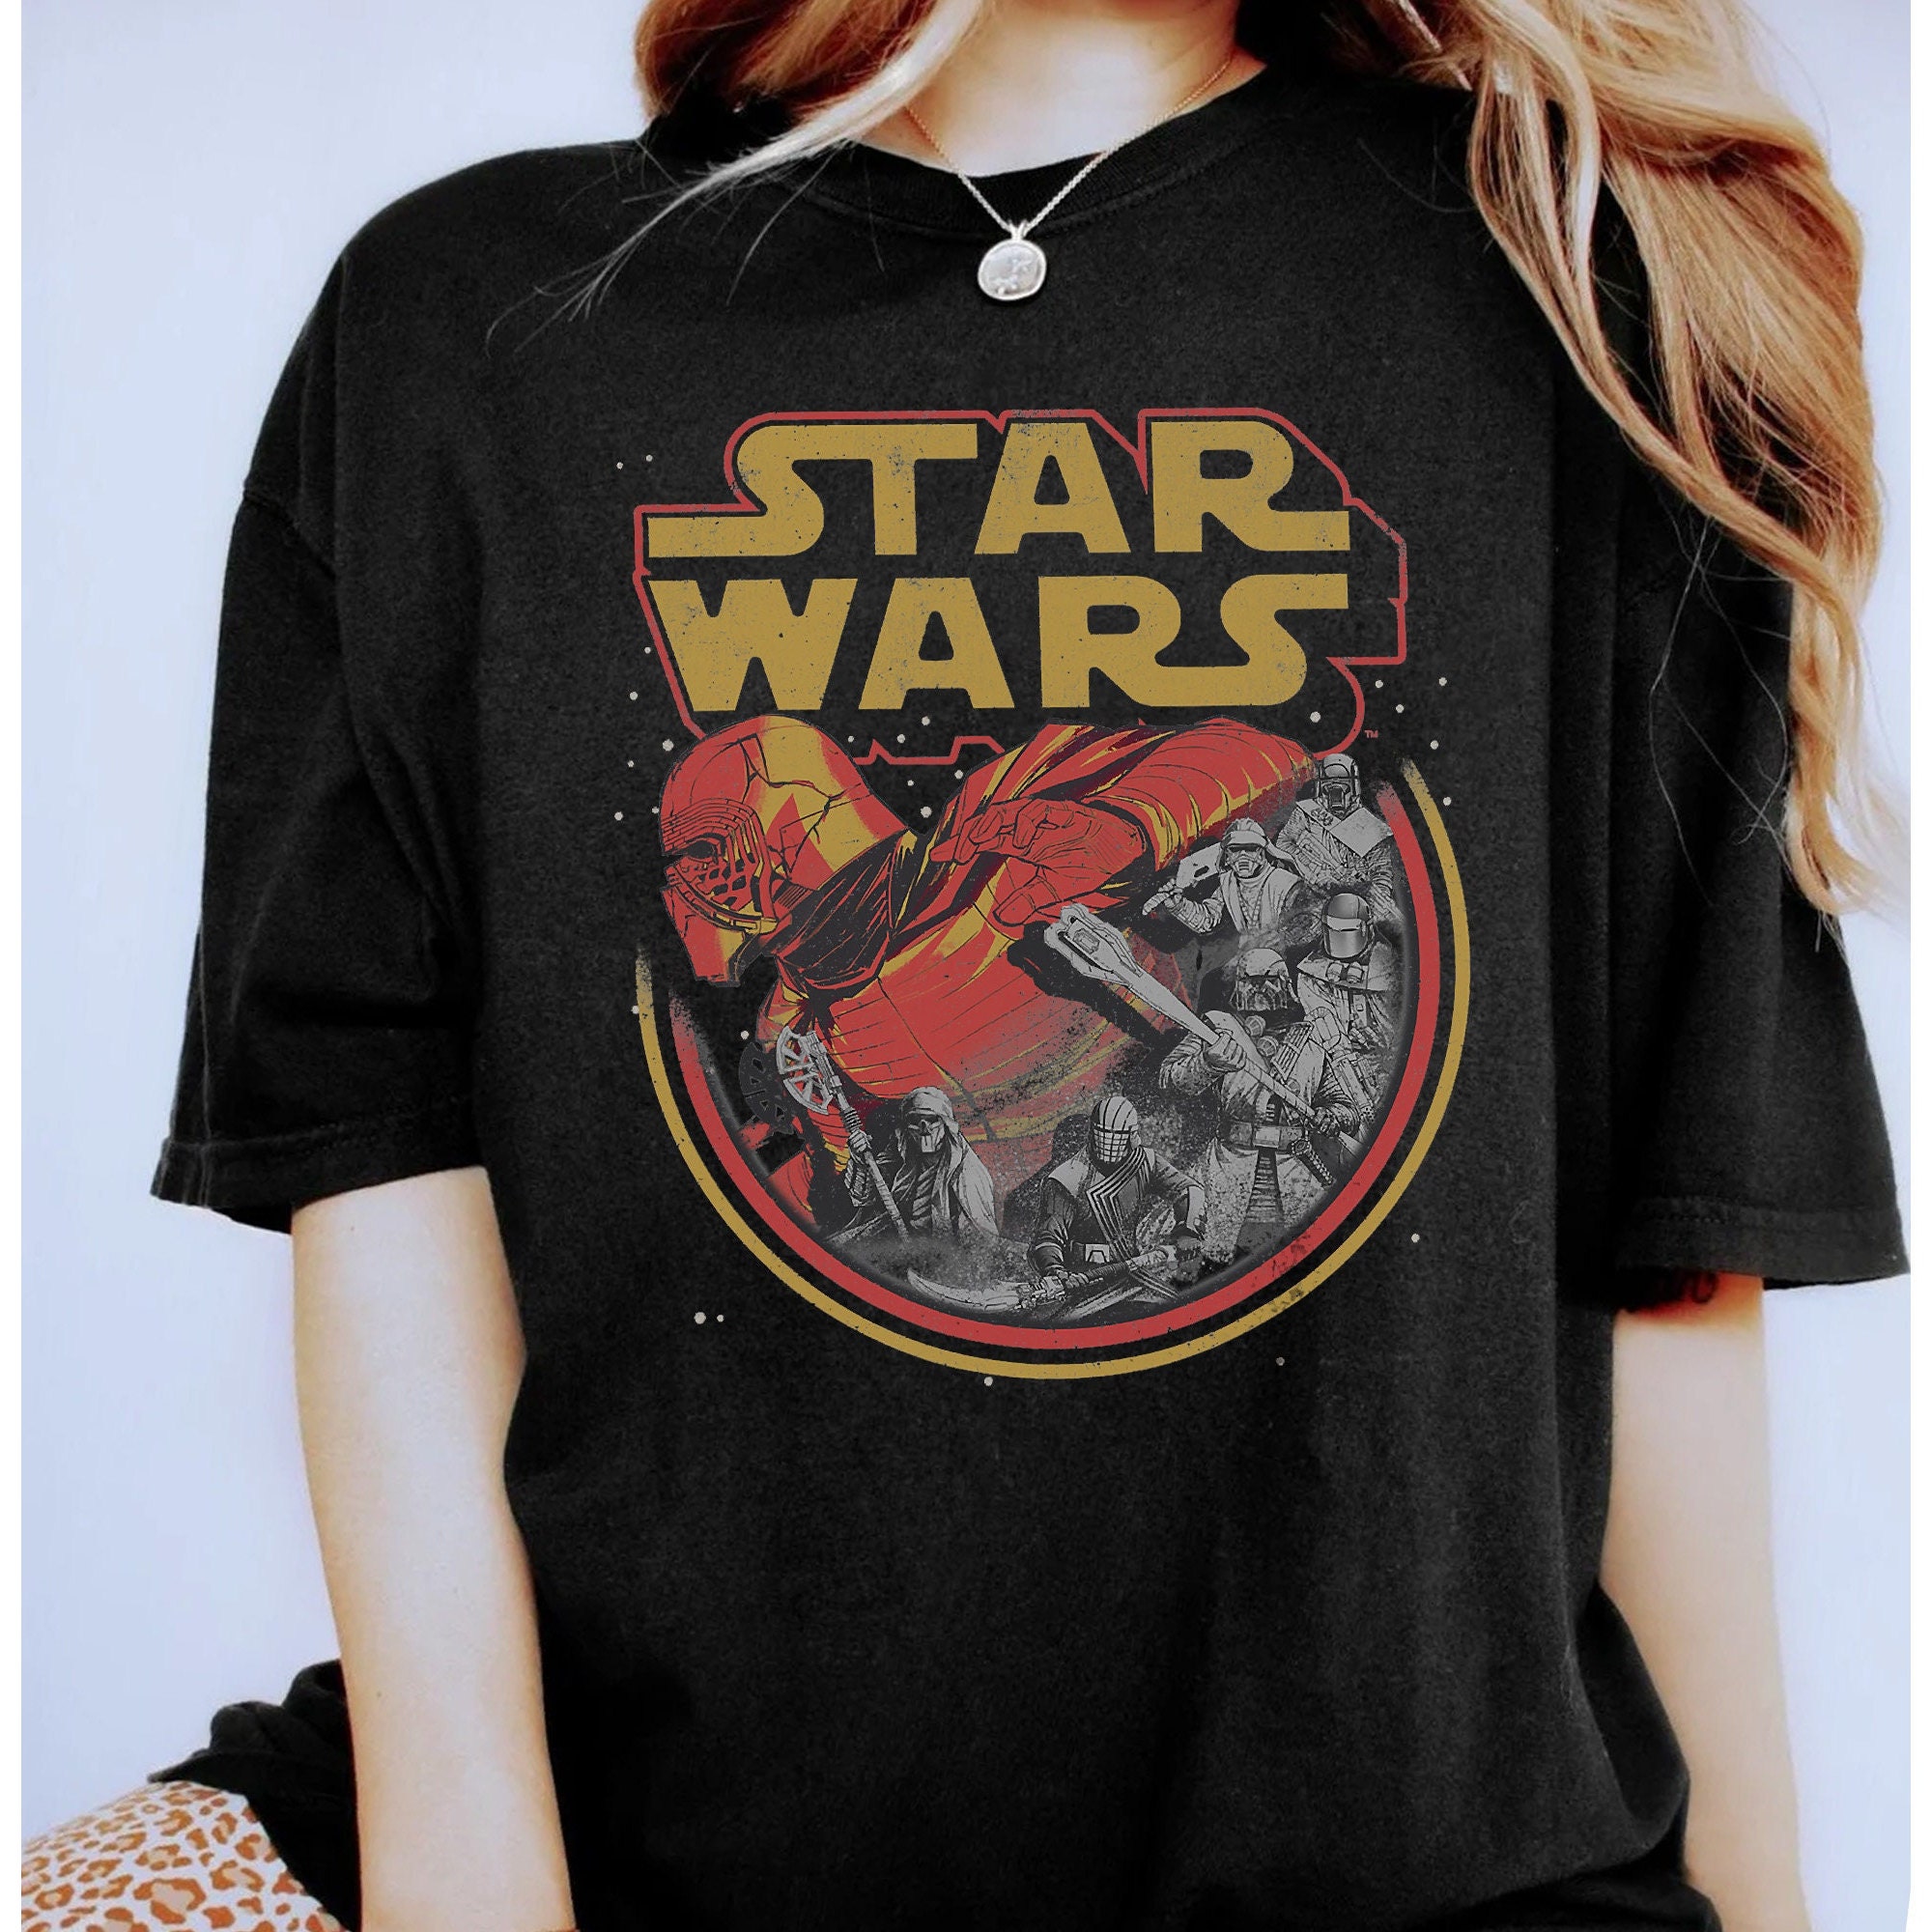 T-shirt - Wars of the Toddler Etsy Ren Tee Adult Unisex Kylo Skywalker Family Birthday Buy of Knights in Online Rise Shirt, Gift Kid Retro Ren Star India 90s Vintage